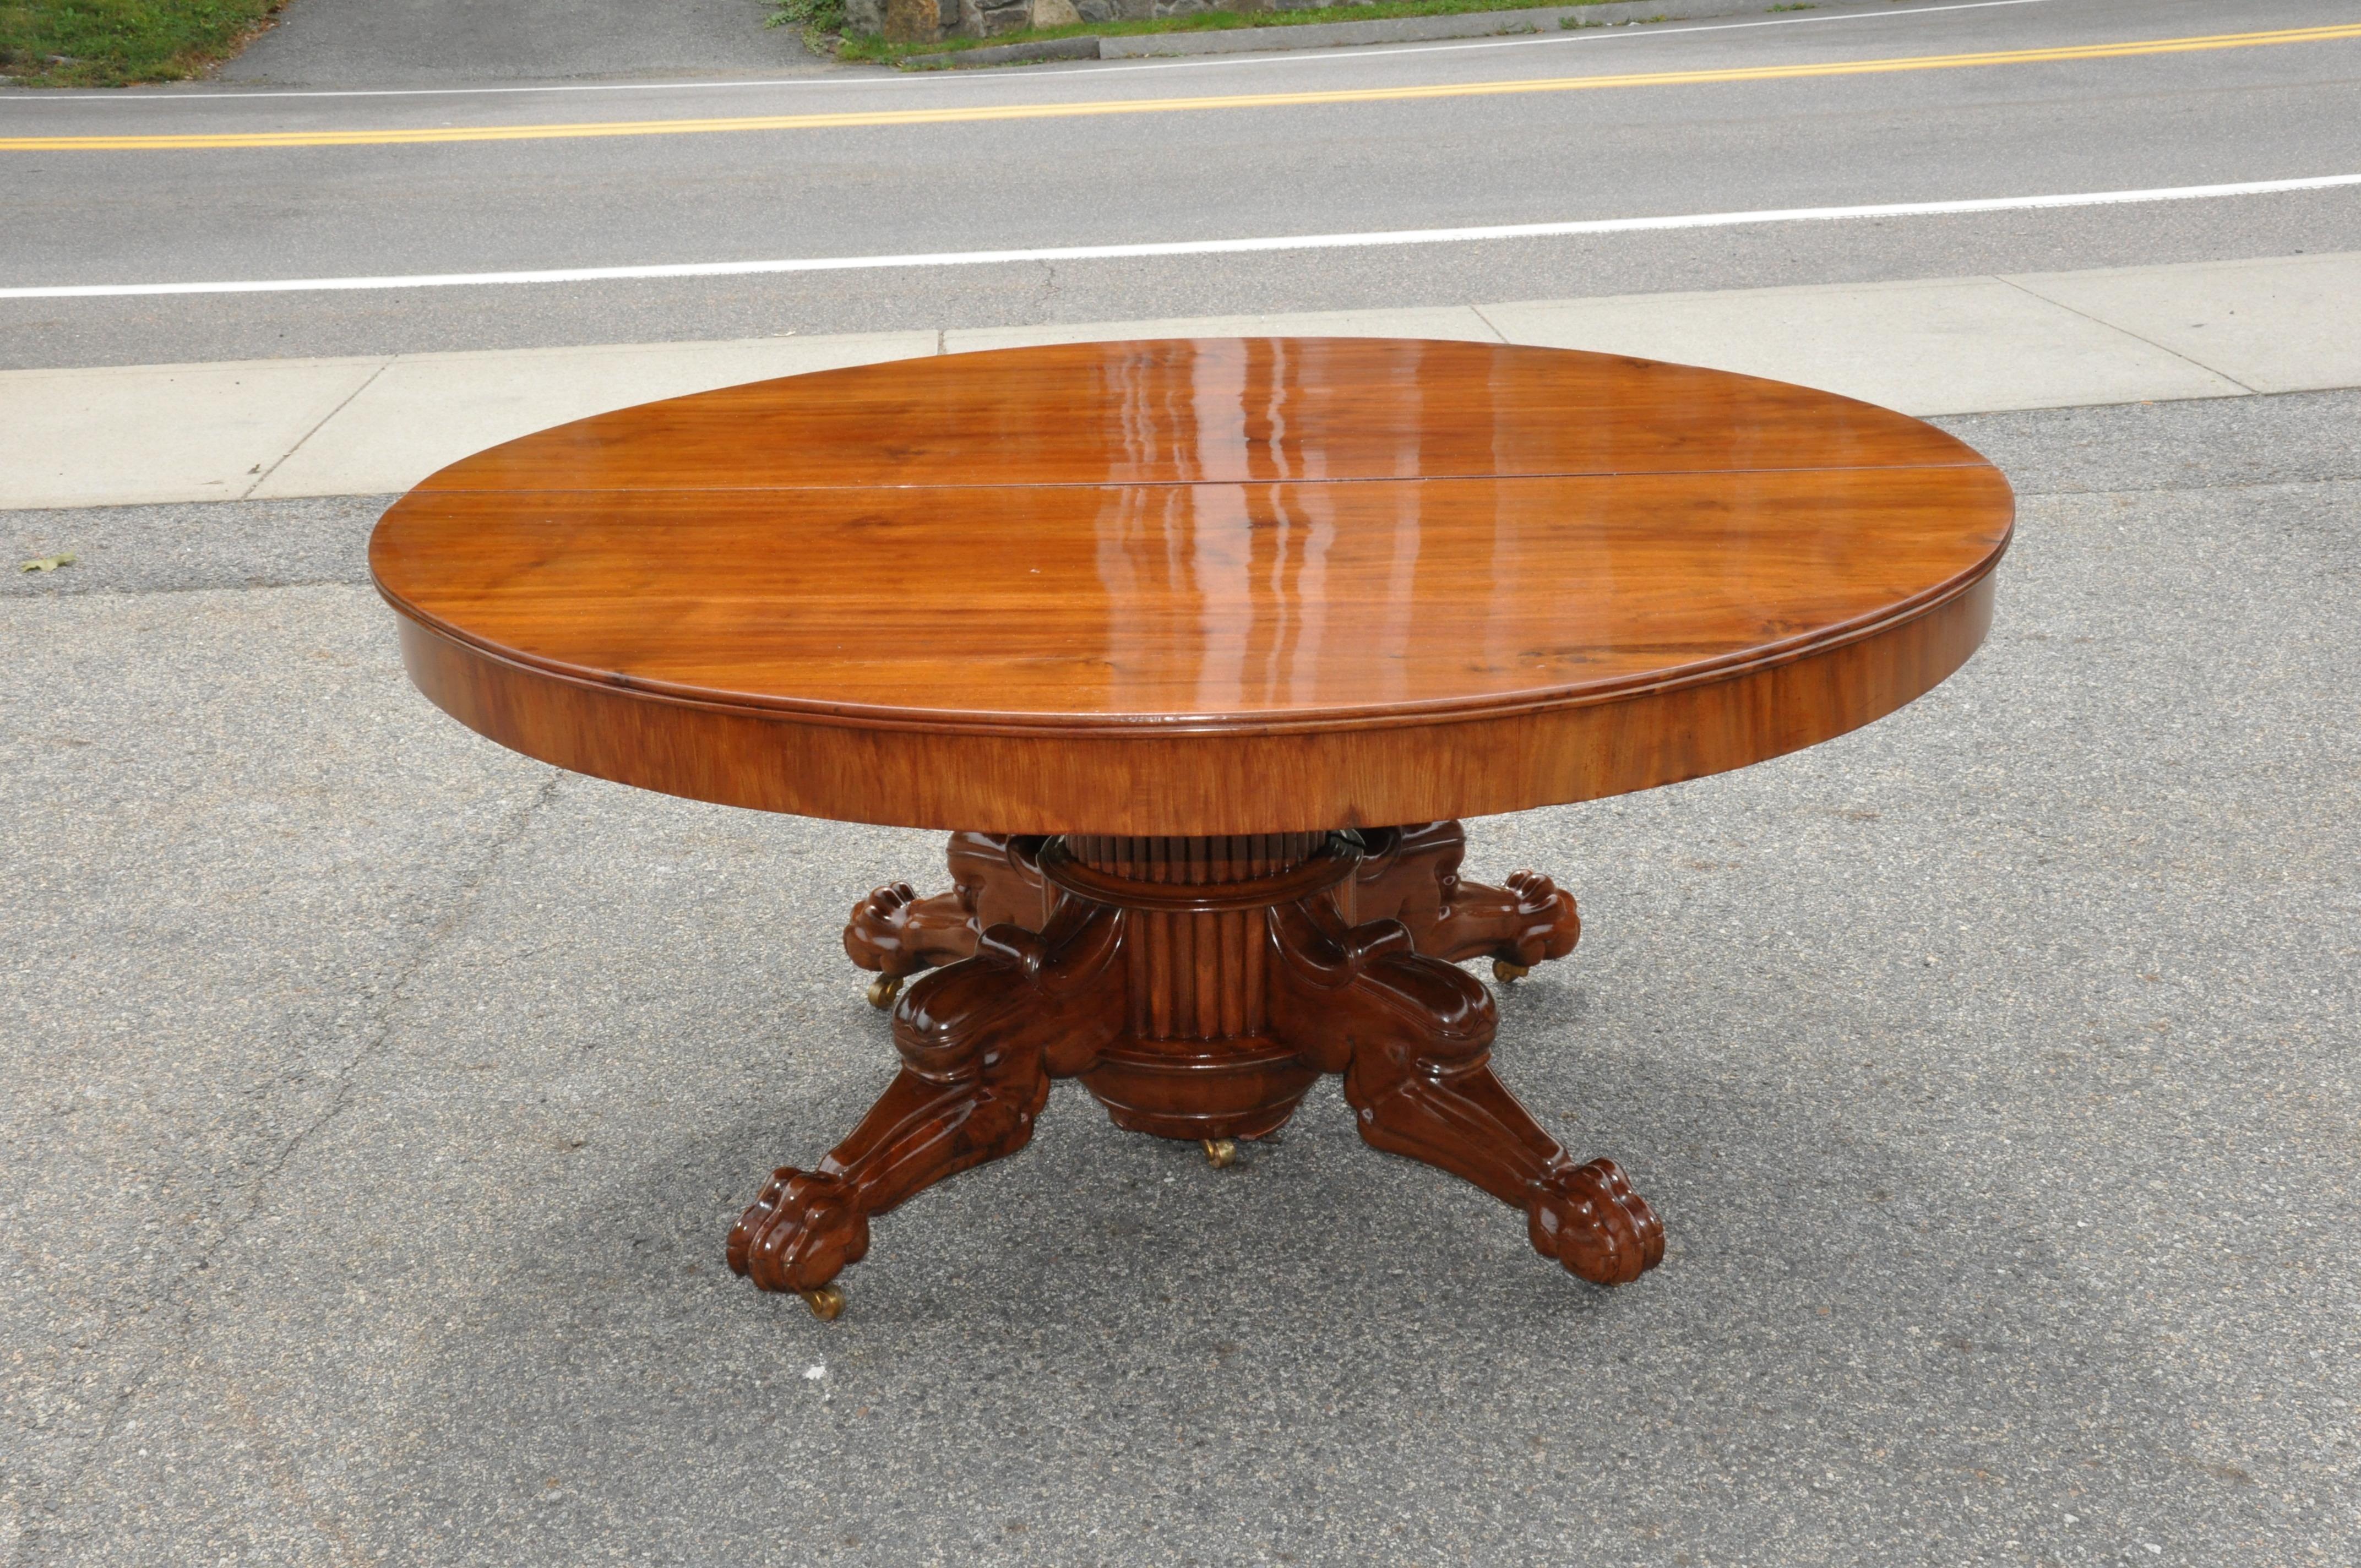 Walnut Baltic or Scandinavian neoclassical dining table

Early 19th century walnut expanding dining table. Round when closed with three additional leaves. Lion leg and paw supports styled from Jacob Desmalter's French designs but wood and